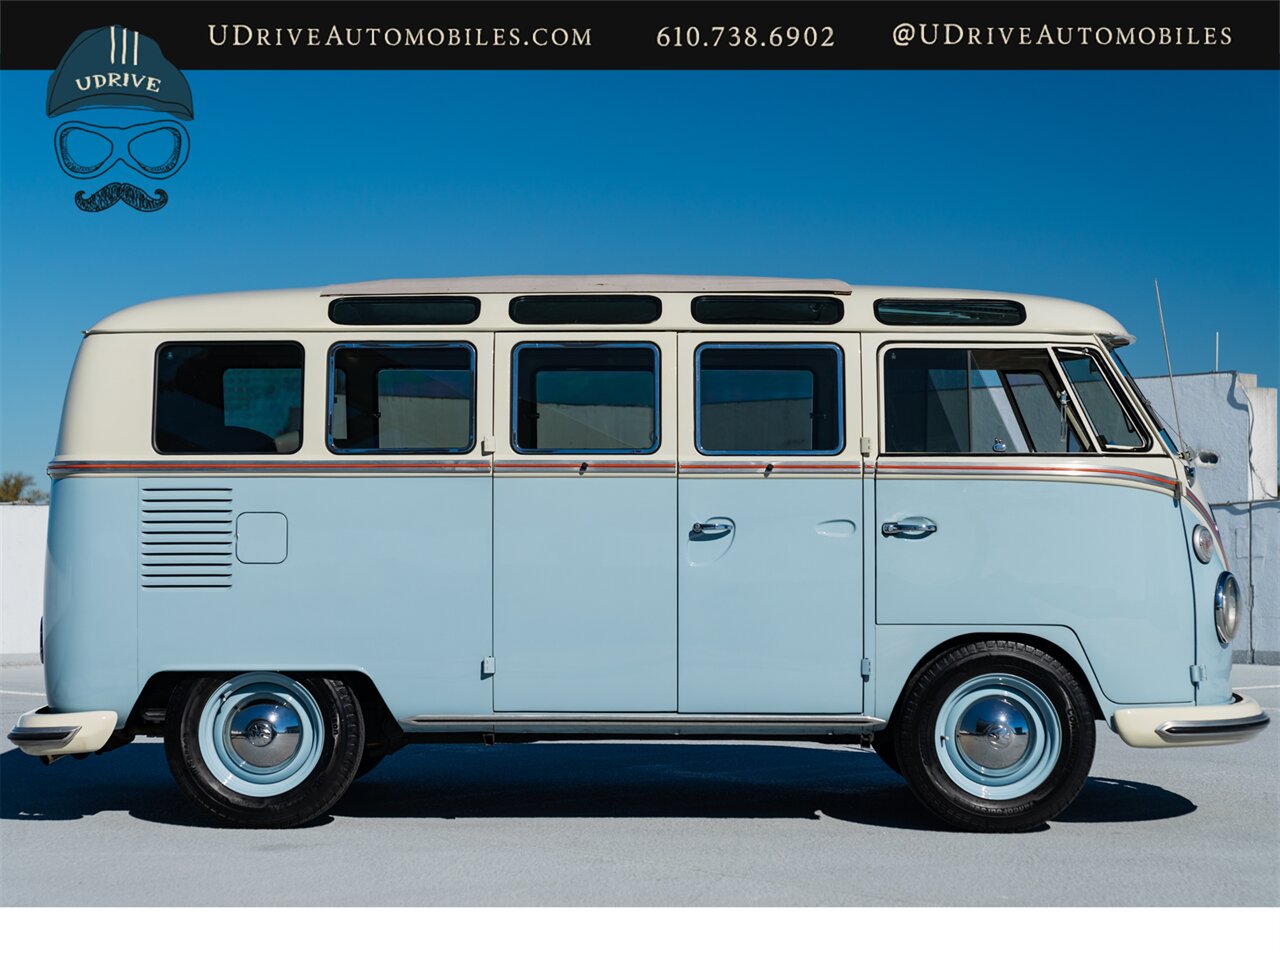 1965 Volkswagen Bus/Vanagon 21 Window Deluxe Transporter  Built By East Coast VW Restorations 1914cc A/C - Photo 18 - West Chester, PA 19382